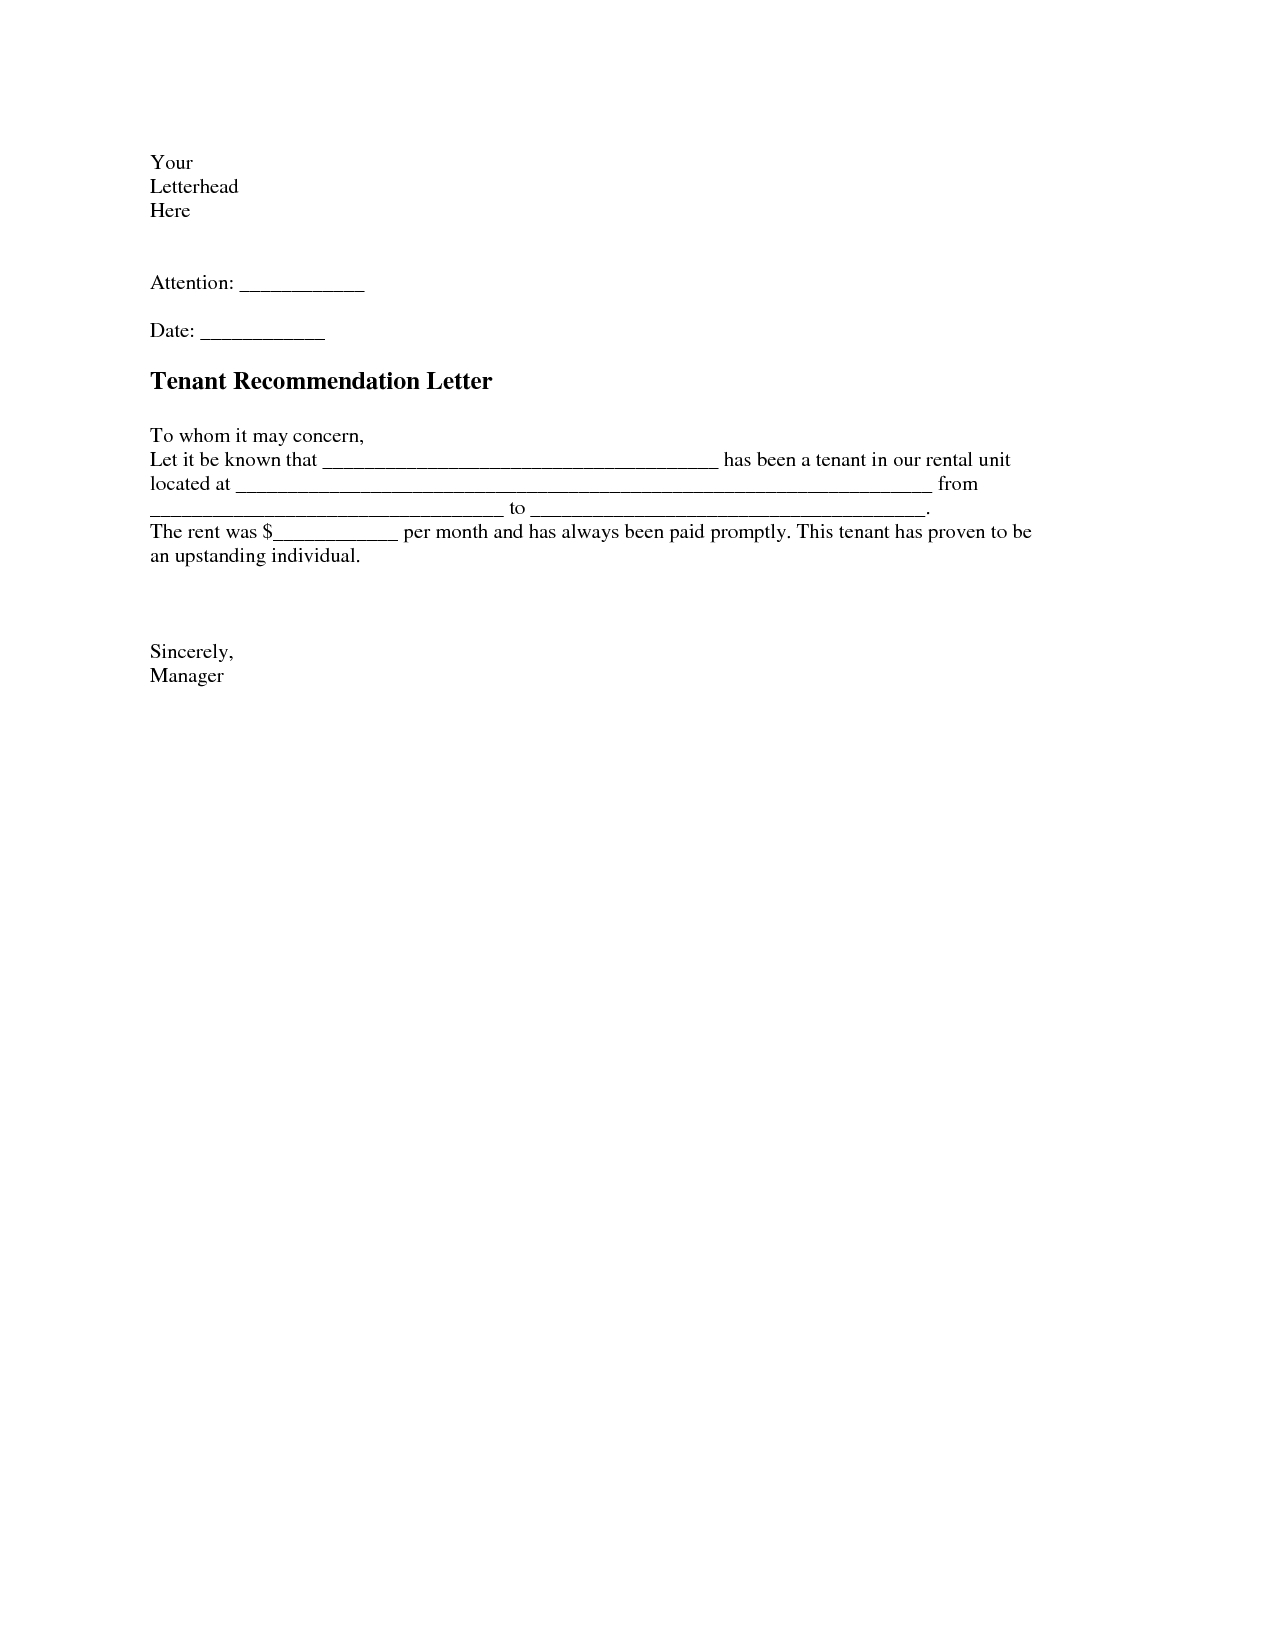 Tenant Recommendation Letter A Tenant Recommendation throughout dimensions 1275 X 1650